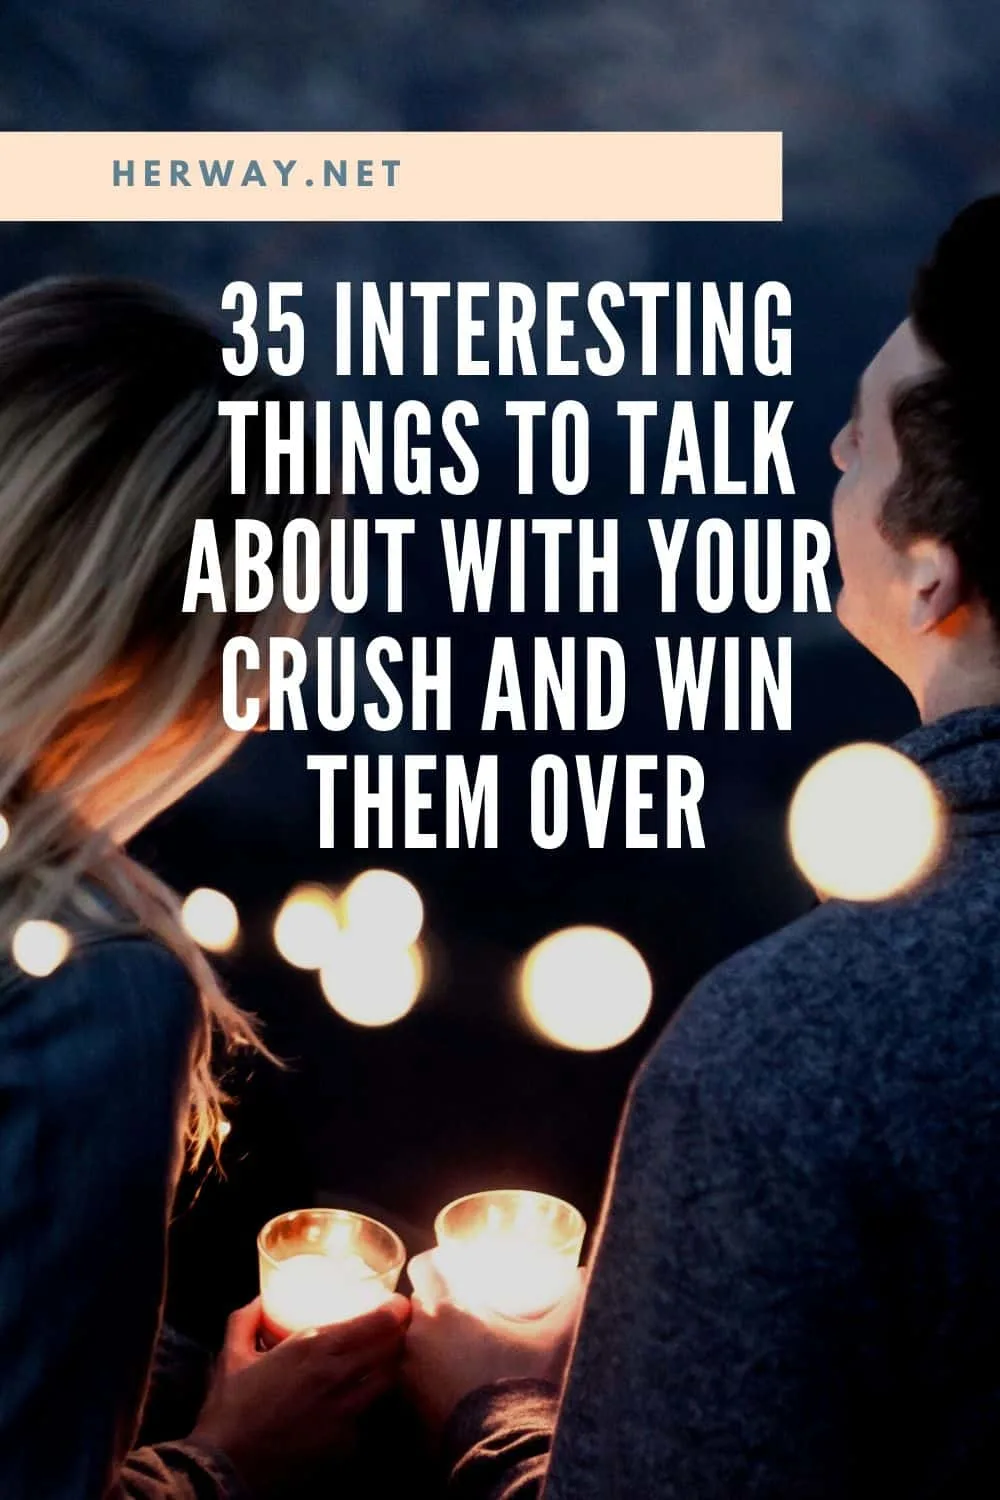 35 Interesting Things To Talk About With Your Crush And Win Them Over Pinterest